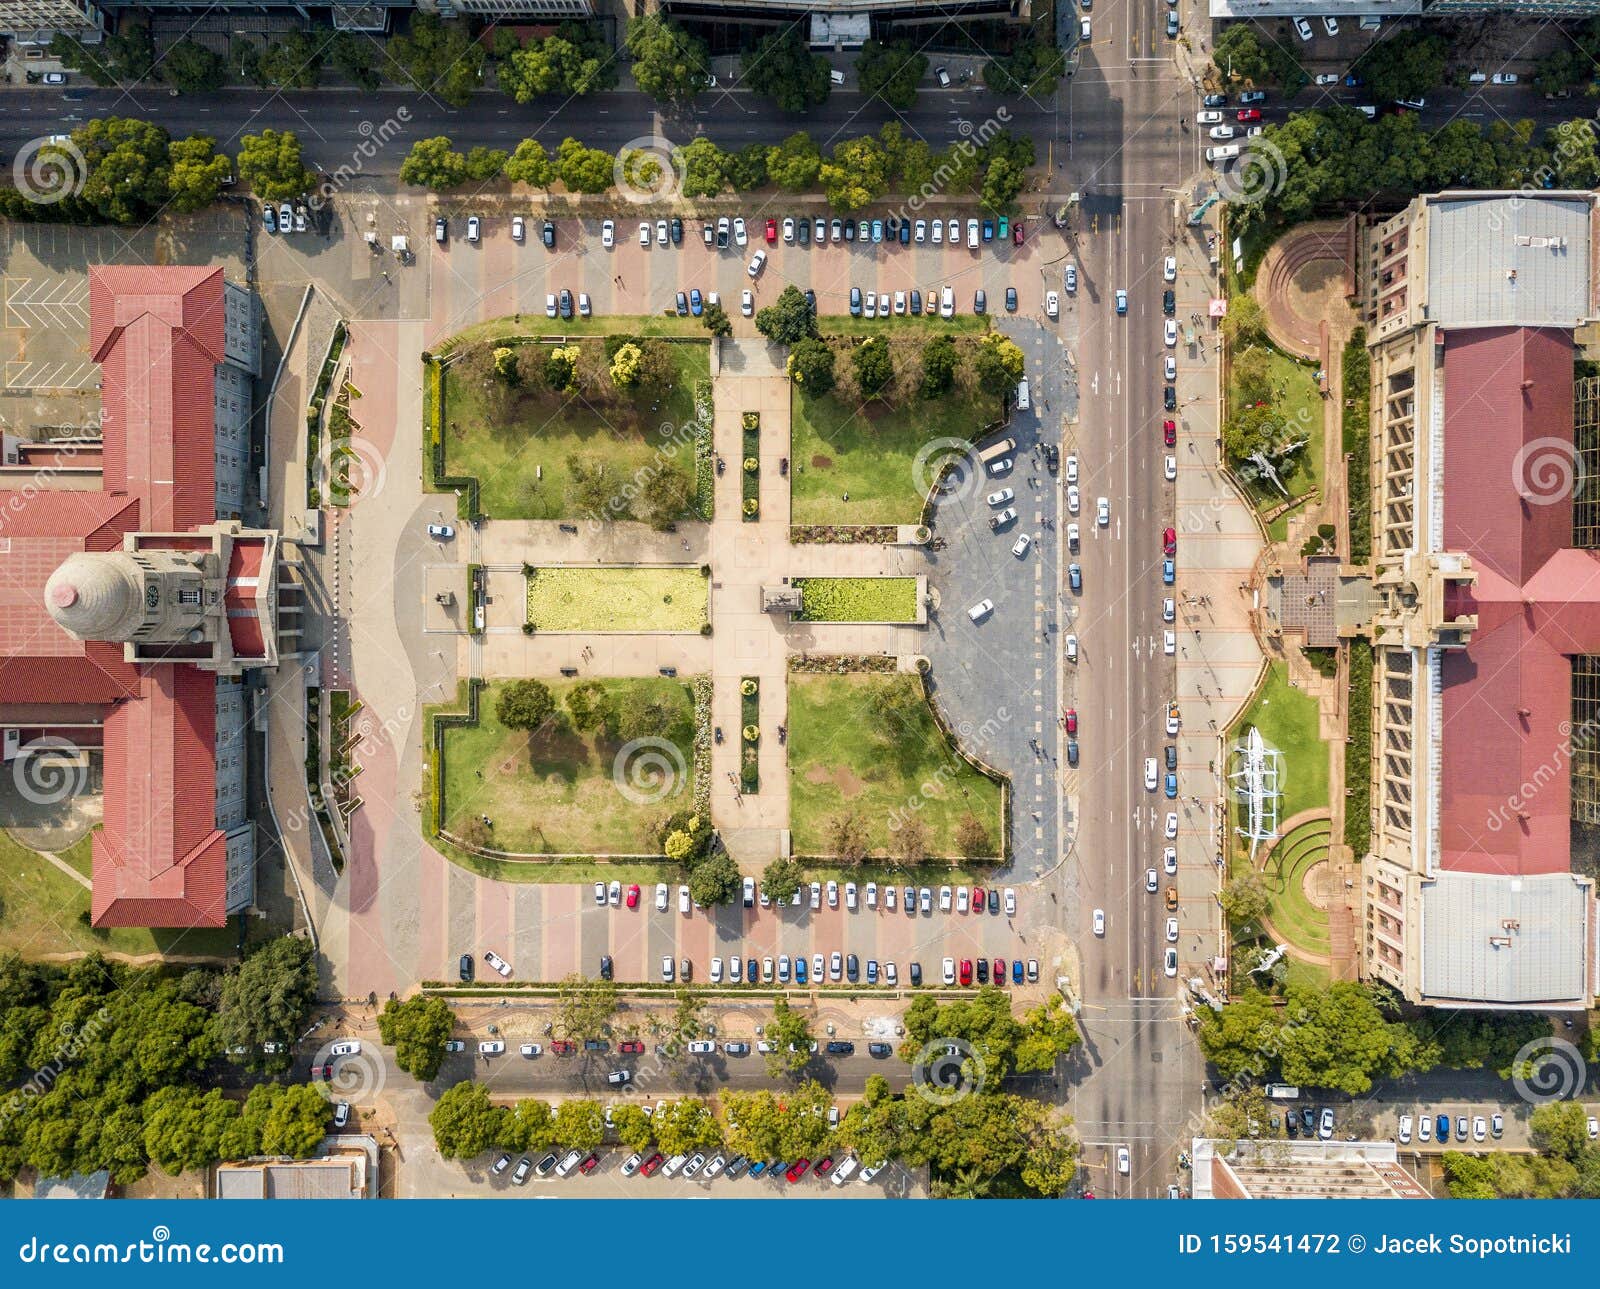 aerial view of tshwane city hall and museum of natural history iin the heart of pretoria, south africa